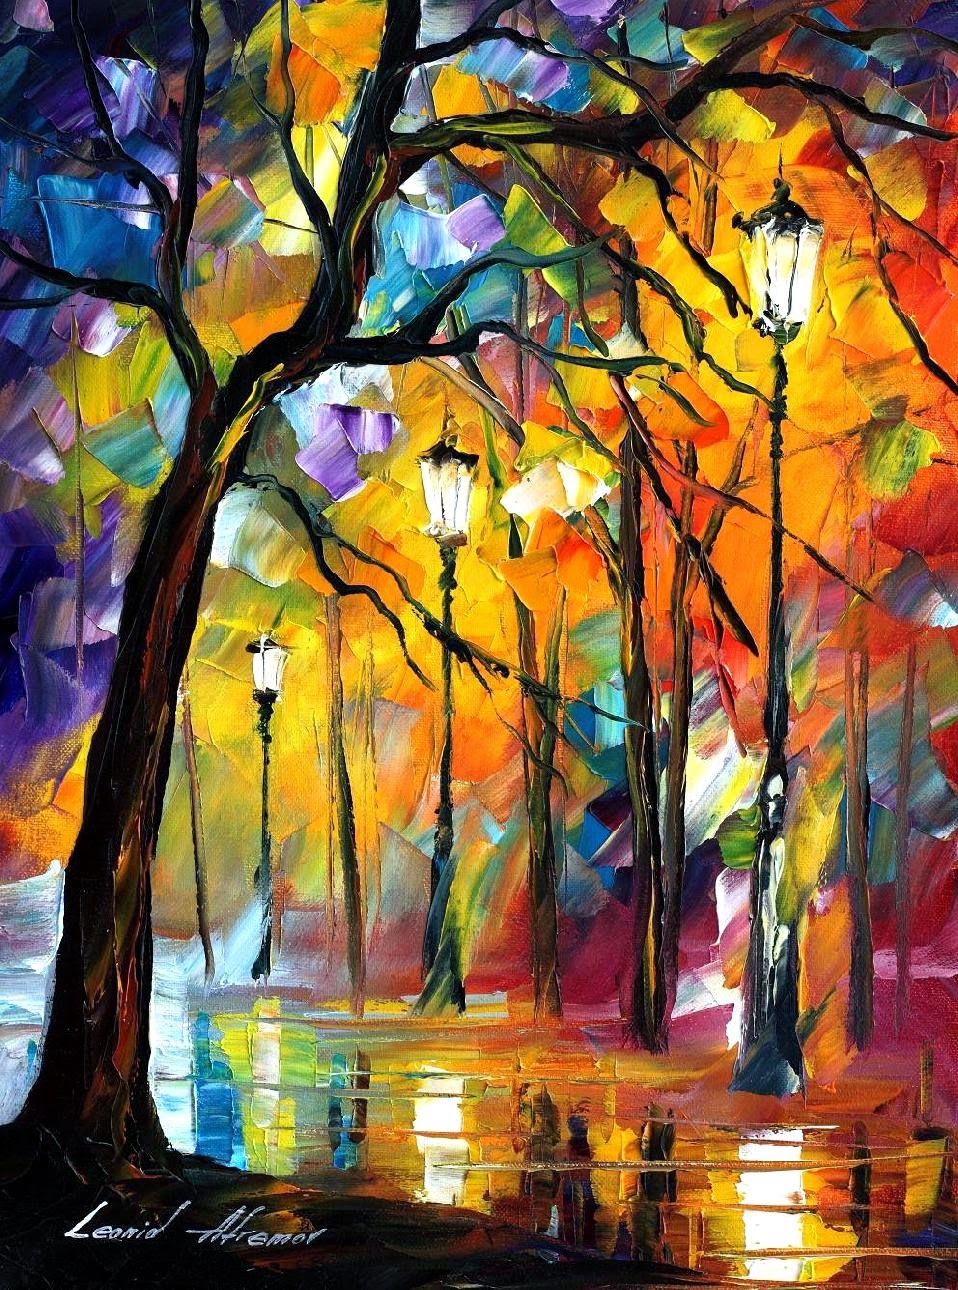 05-Leonid-Afremov-Expression-of-Love-for-the-Art-Of-Painting-www-designstack-co